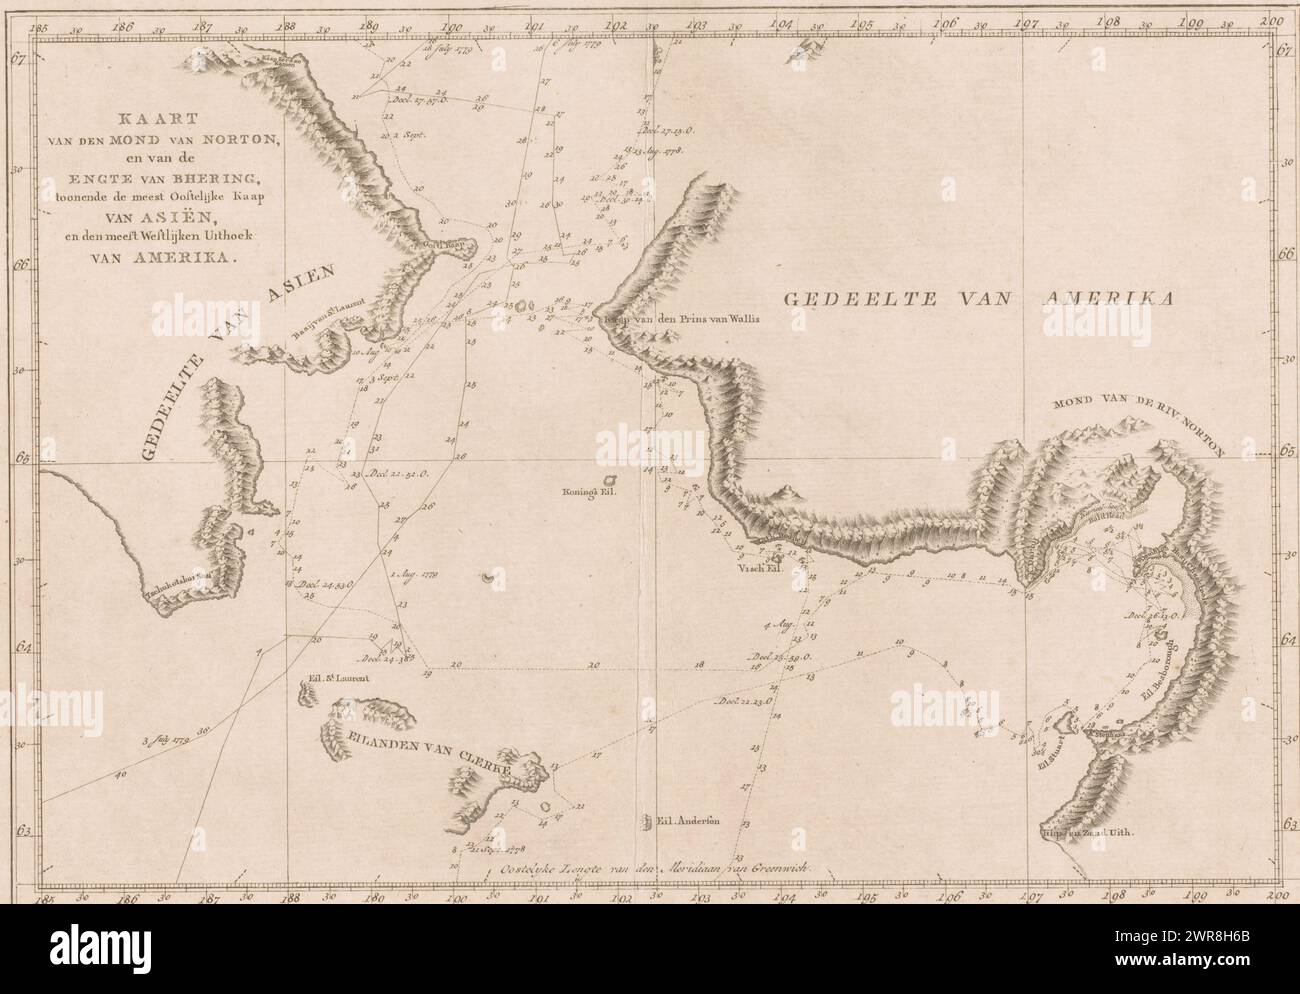 Map of the mouth of Norton and the Bering Strait, Map of the mouth of Norton and the Strait of Bhering showing the easternmost cape of Asia and the westernmost corner of America (title on object), Map of the waters between America and Asia at the Bering Strait and the Norton Estuary. The routes of the 1778 and 1779 expeditions of James Cook and Charles Clerke are indicated. Around a degree division., print maker: anonymous, 1780 - 1800, paper, engraving, etching, height 325 mm × width 410 mm, print Stock Photo